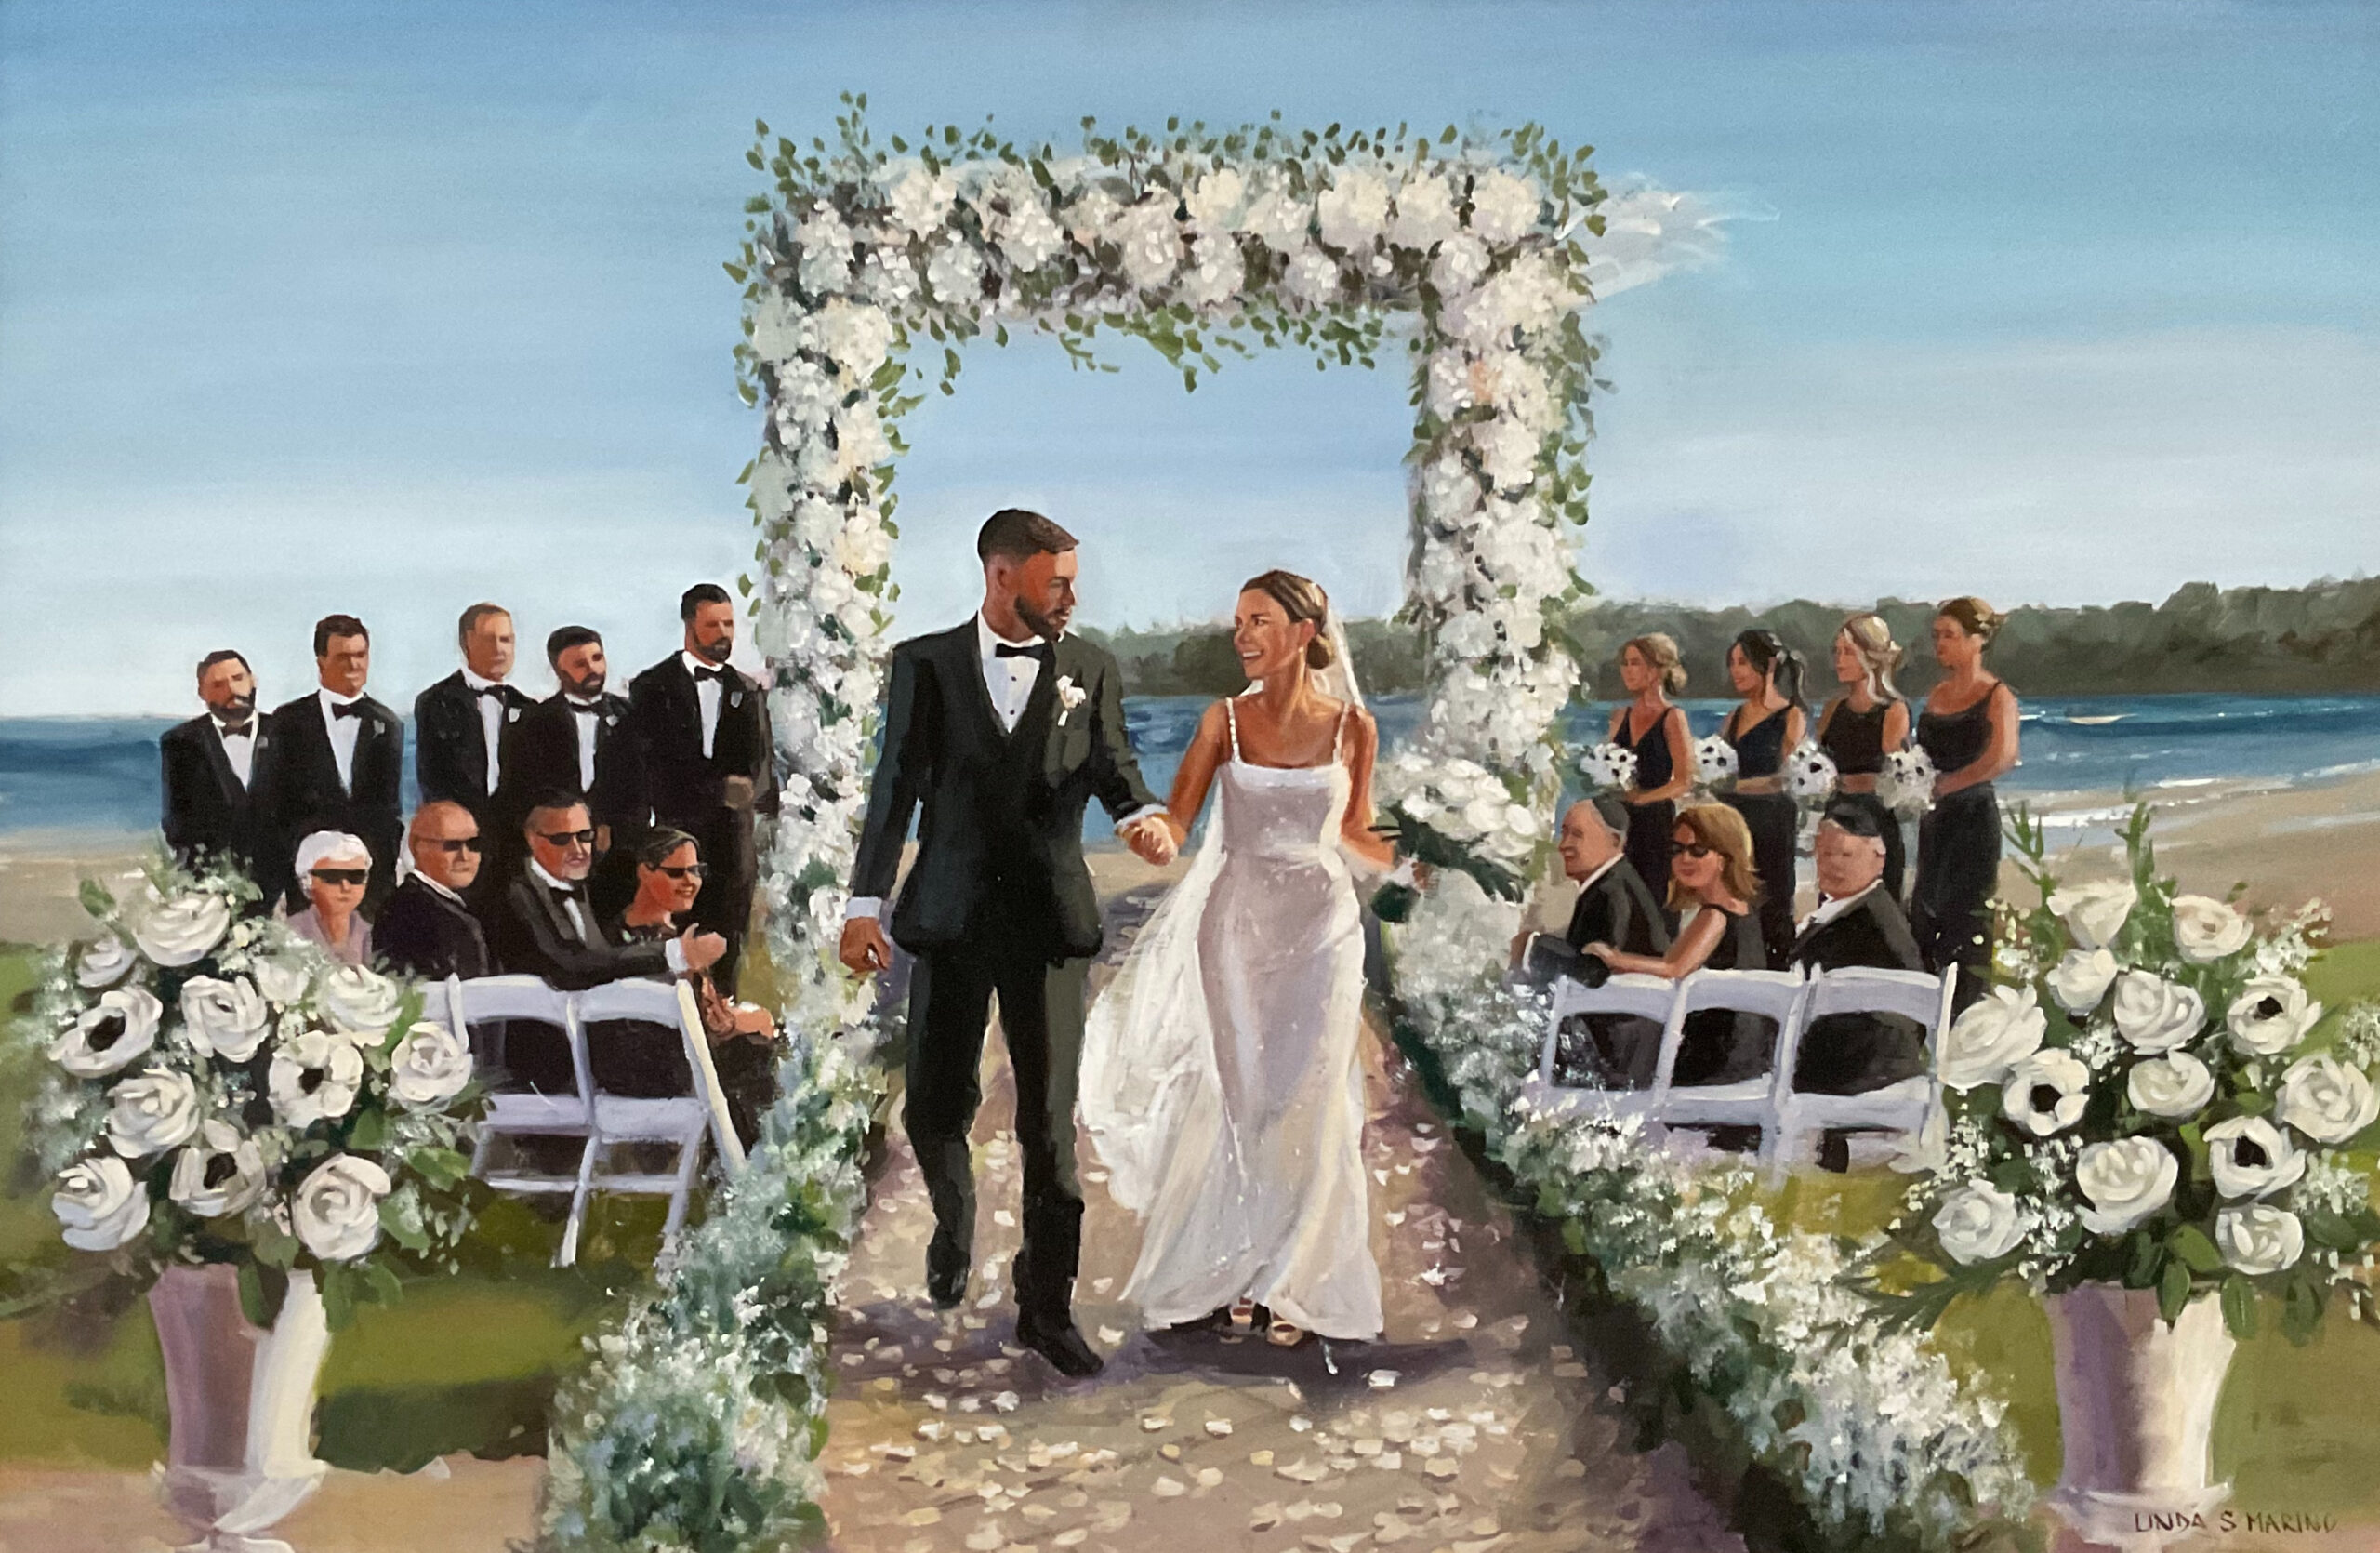 Painting of bride and groom walking down aisle outdoor wedding with white flowers, ocean scene in the back with family and friends in the painting